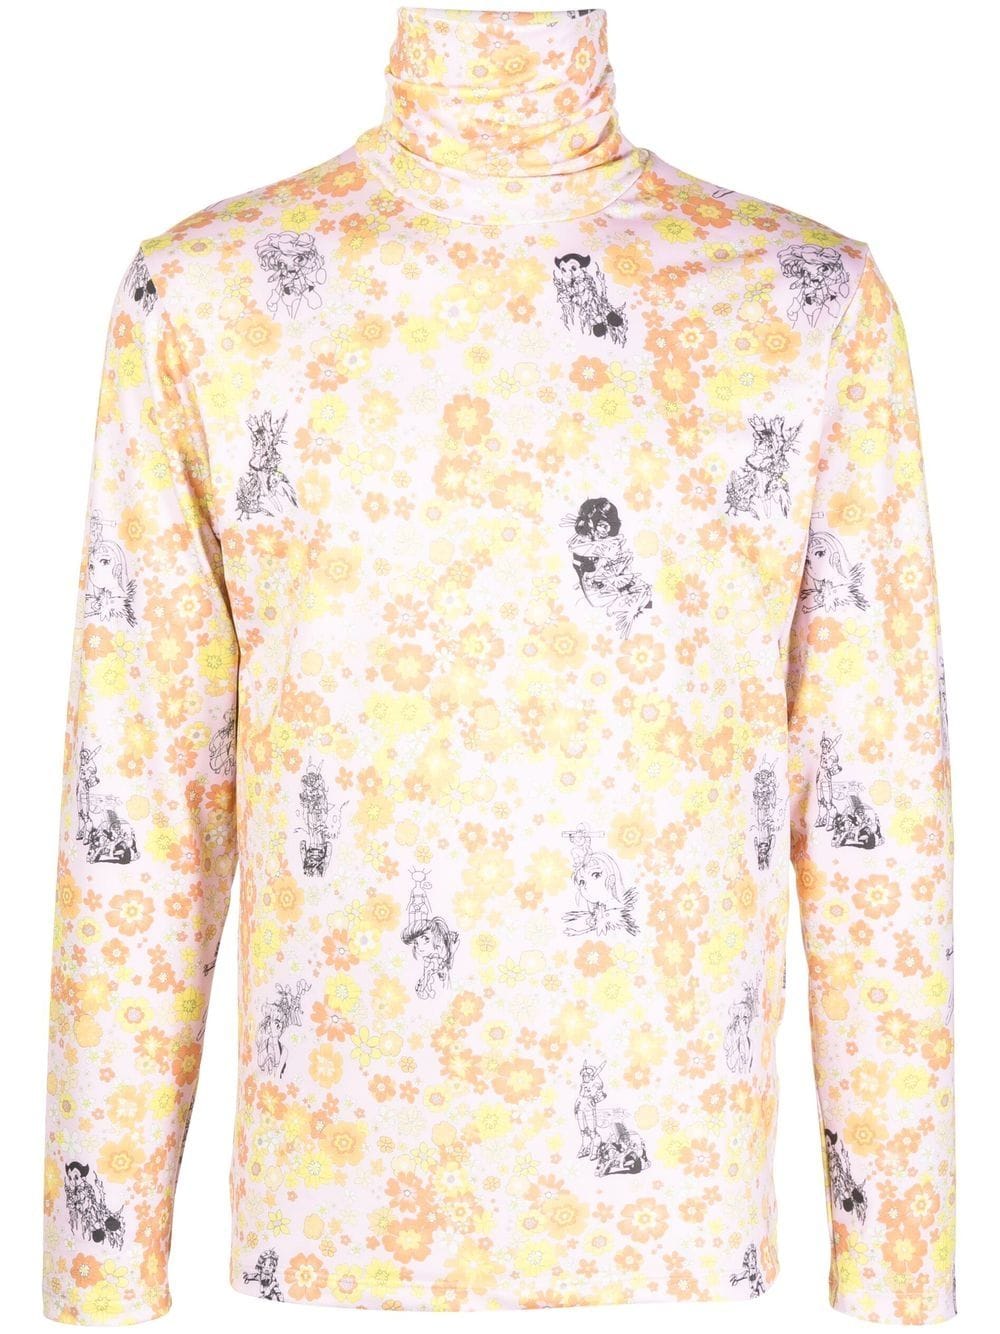 Liberal Youth Ministry floral motif print high neck top - Yellow von Liberal Youth Ministry